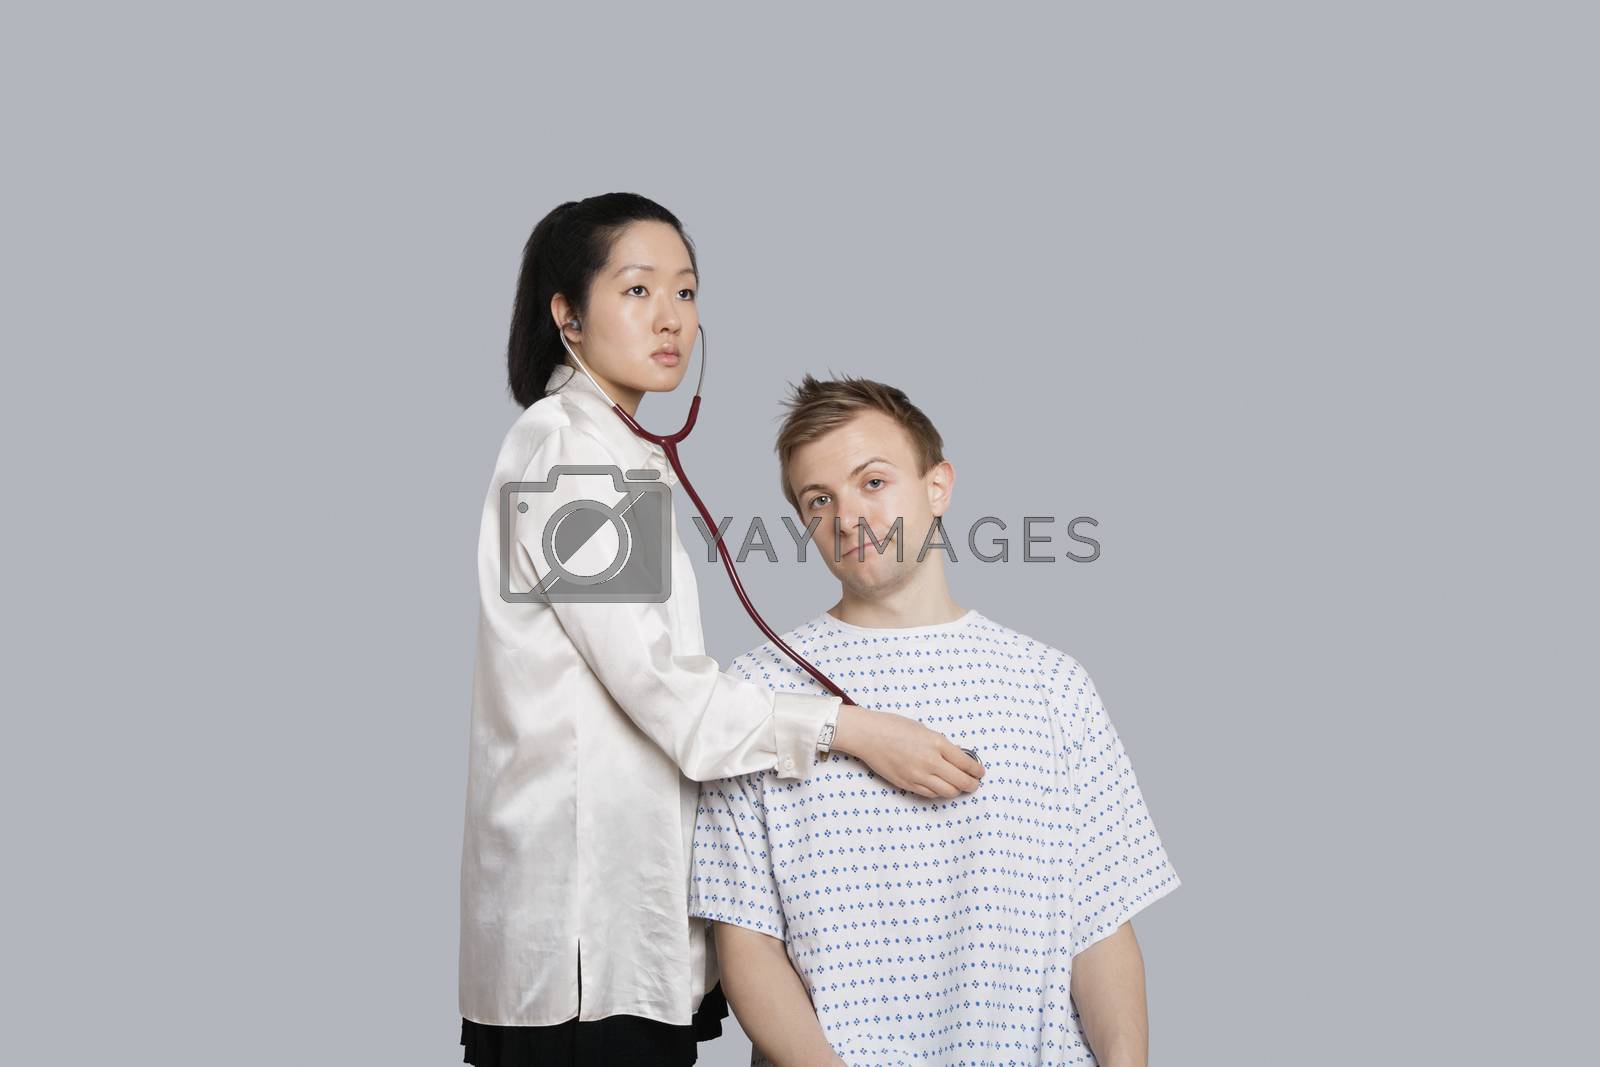 Royalty free image of Patient being examined by the doctor by moodboard